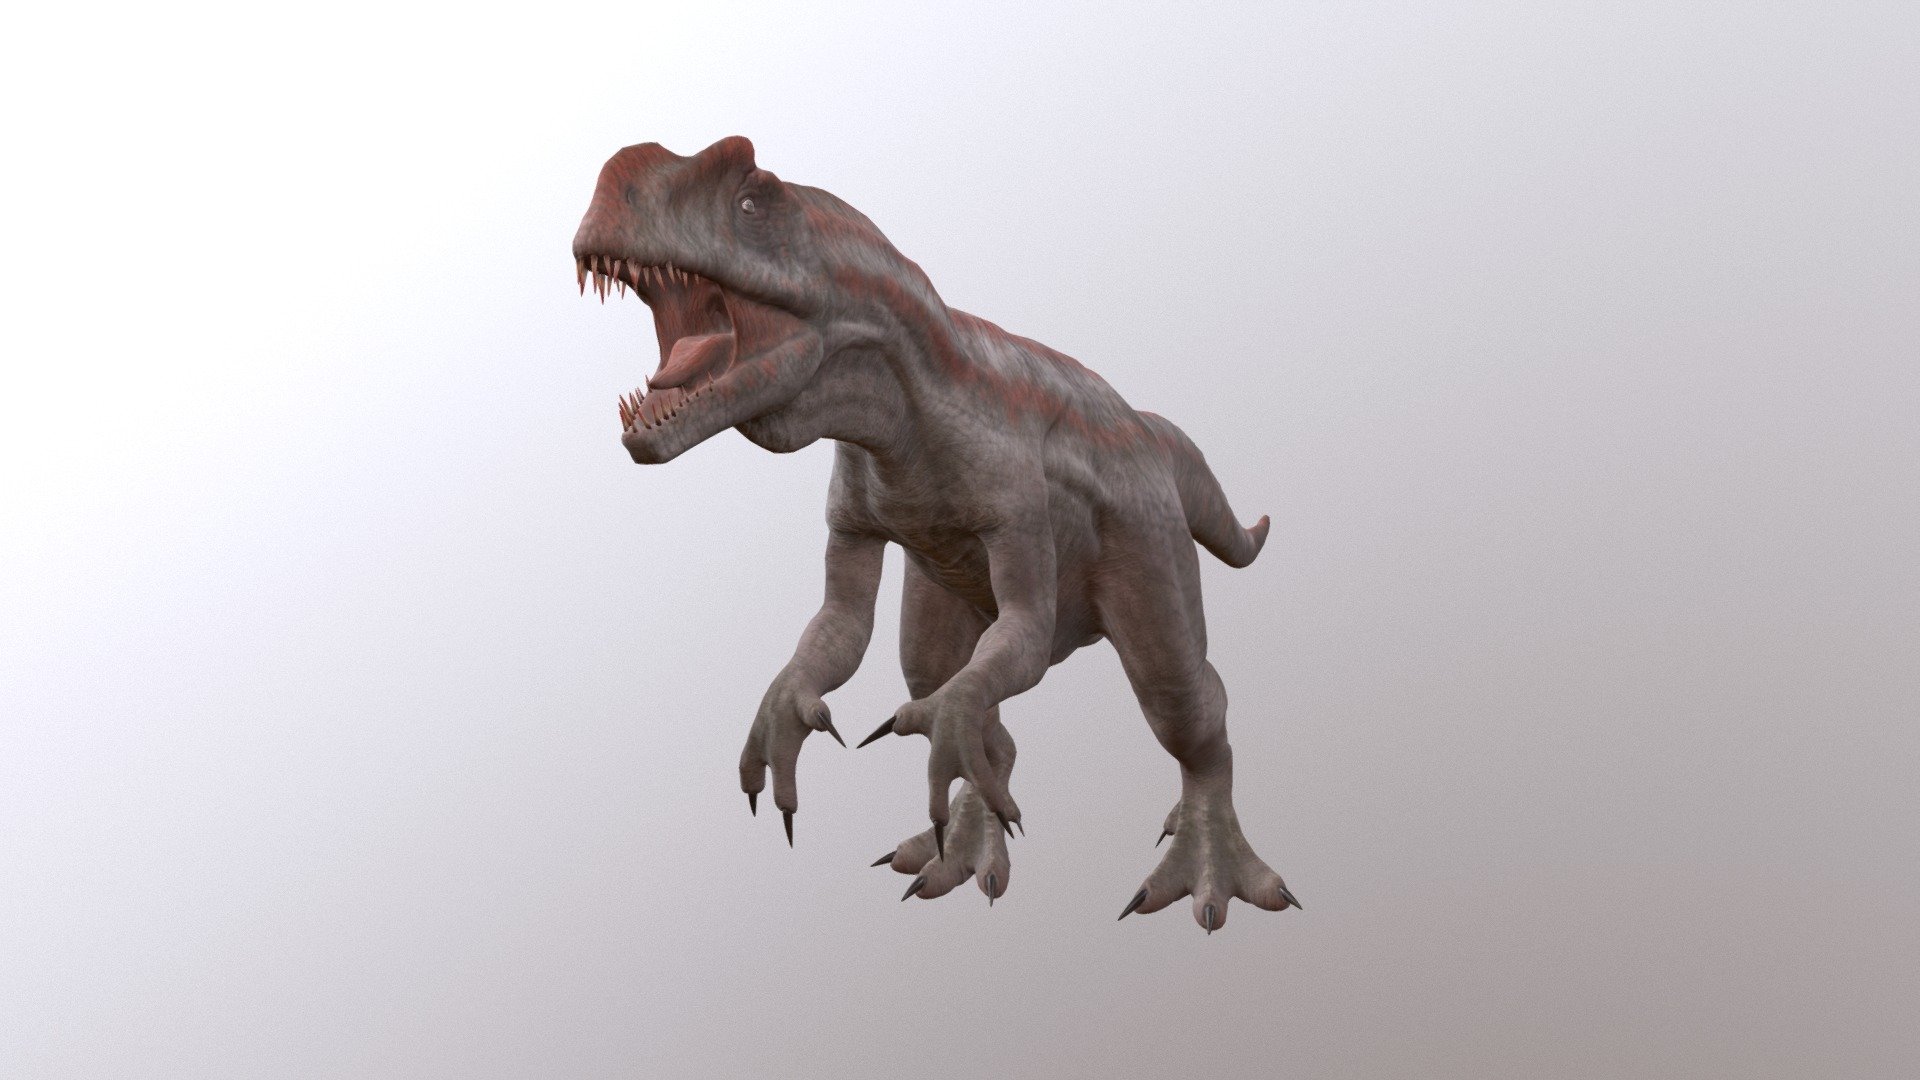 3DAllosaurus 2_0 is an update and remaster of the later 3DAllosaurus, this is a model of an Allosaurus made in ZBrush, rigged and animated with blender.

This new model was tested in Unreal Engine 4

Contains some basic animations as:


Walk 
Run 
Idle 
Attacks 
Death 
Others

It comes with four different body skins, four different eye skins and 3 different claw/teeth skins

In the additional files, you'll be able to find the following formats:
OBJ
FBX
ZTL
Blend
Textures

This model was made in a way that it will be easy to make changes at your wish

Got anything to ask or a suggestion? Leave us a coment or send a message 3d model